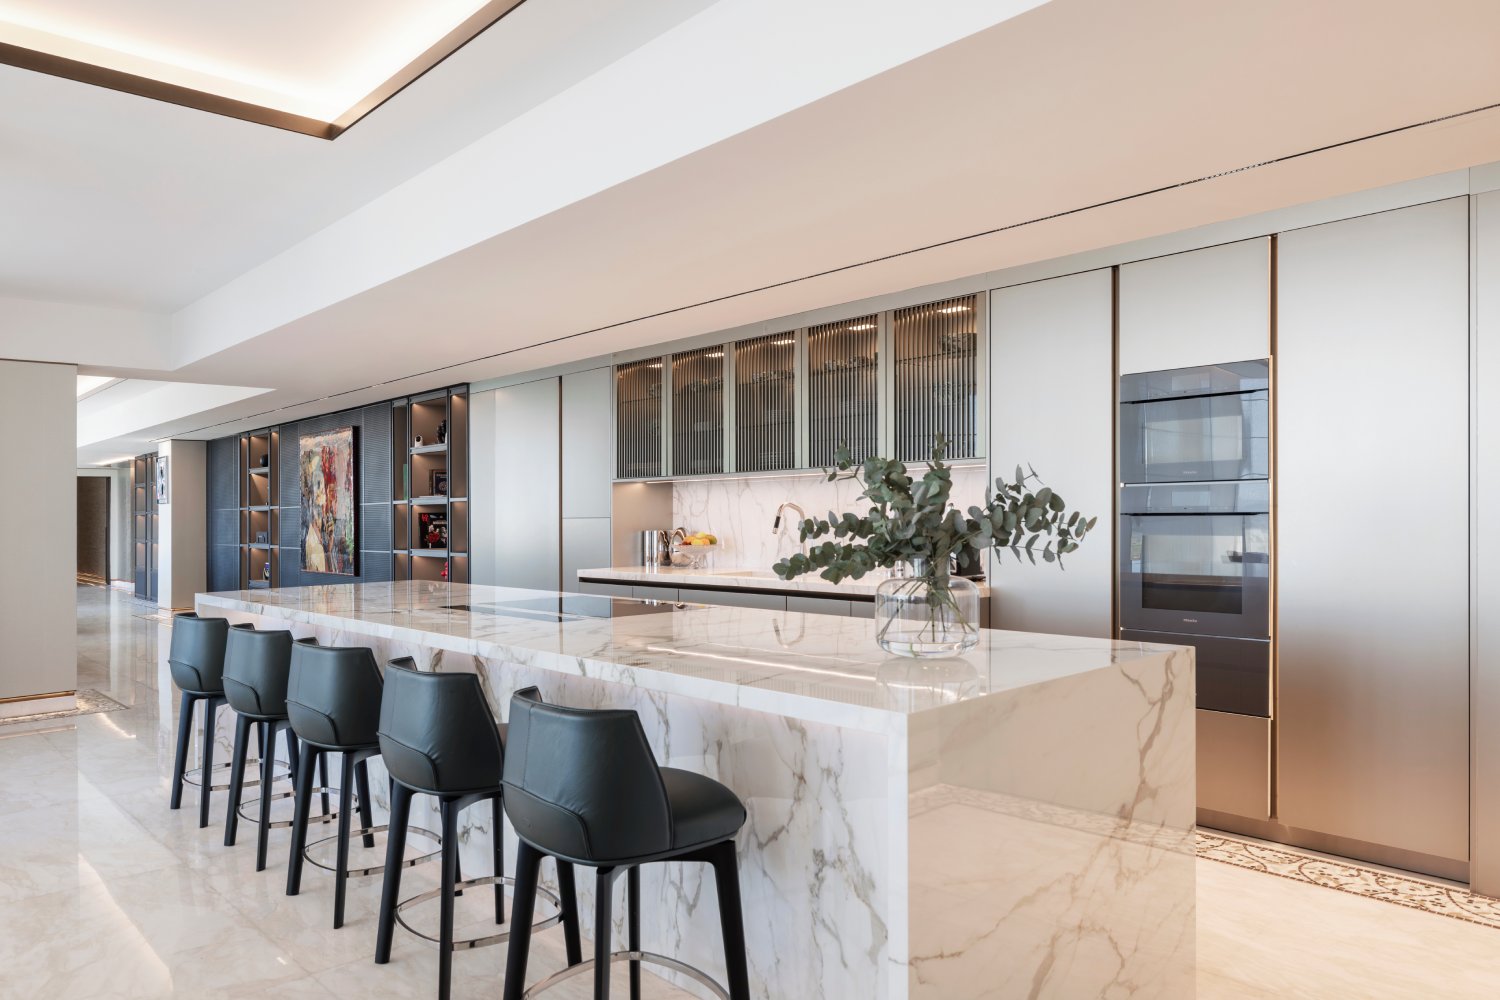 Schmalenbach's shelving system and bespoke Siematic kitchen at Bulgari apartments Dubai. Project by Al Gurg Living.